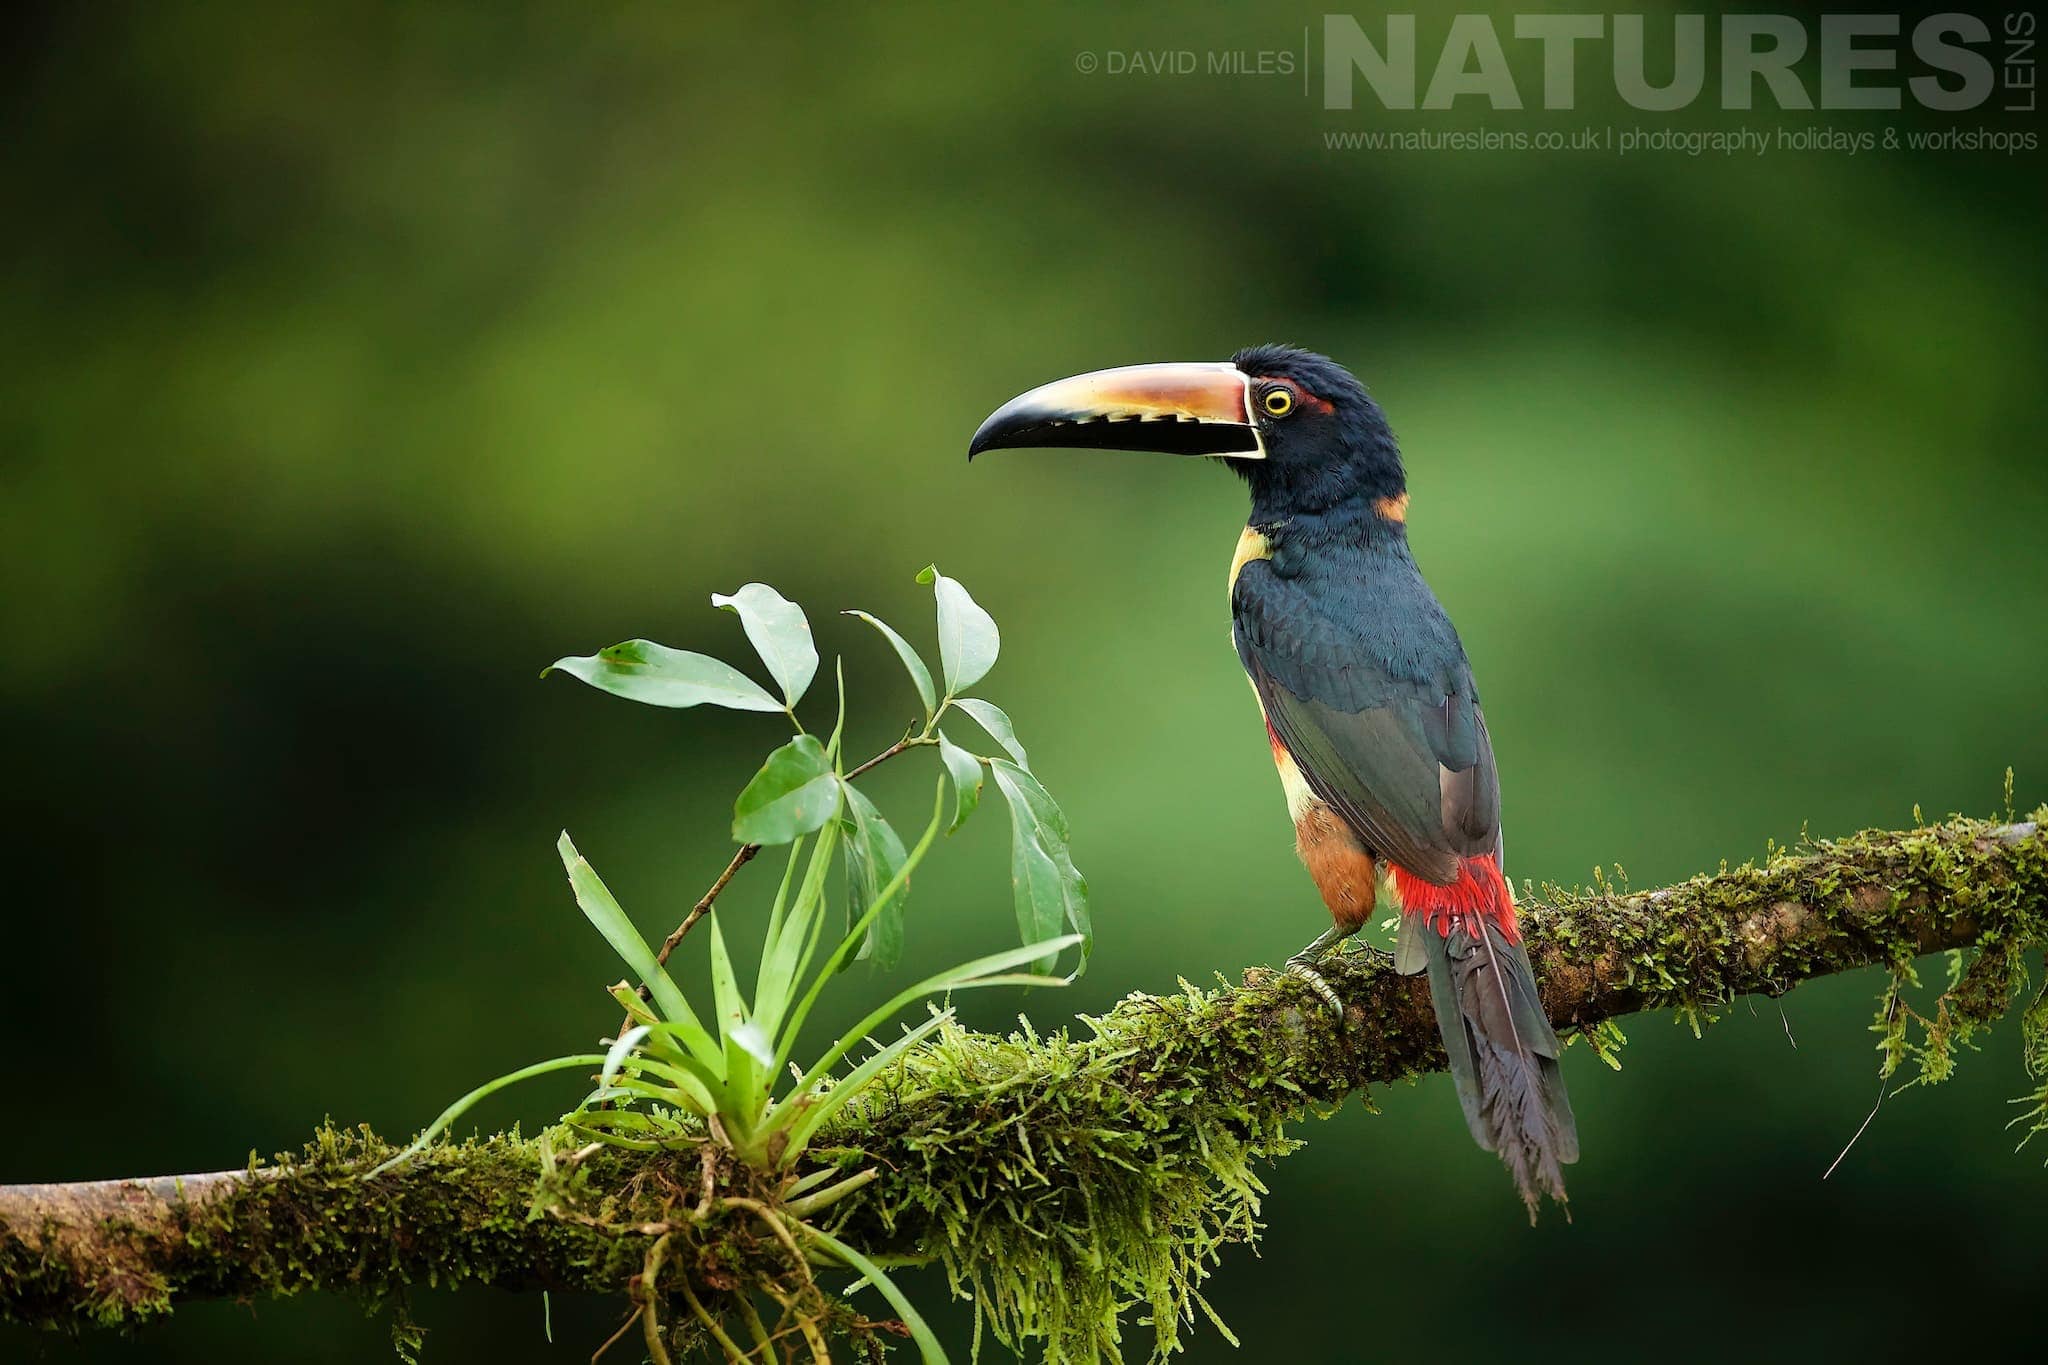 A Collared Aracari Typical Of The Kind Of Image We Hope You Will Capture During Our Costa Rican Wildlife Photography Holiday